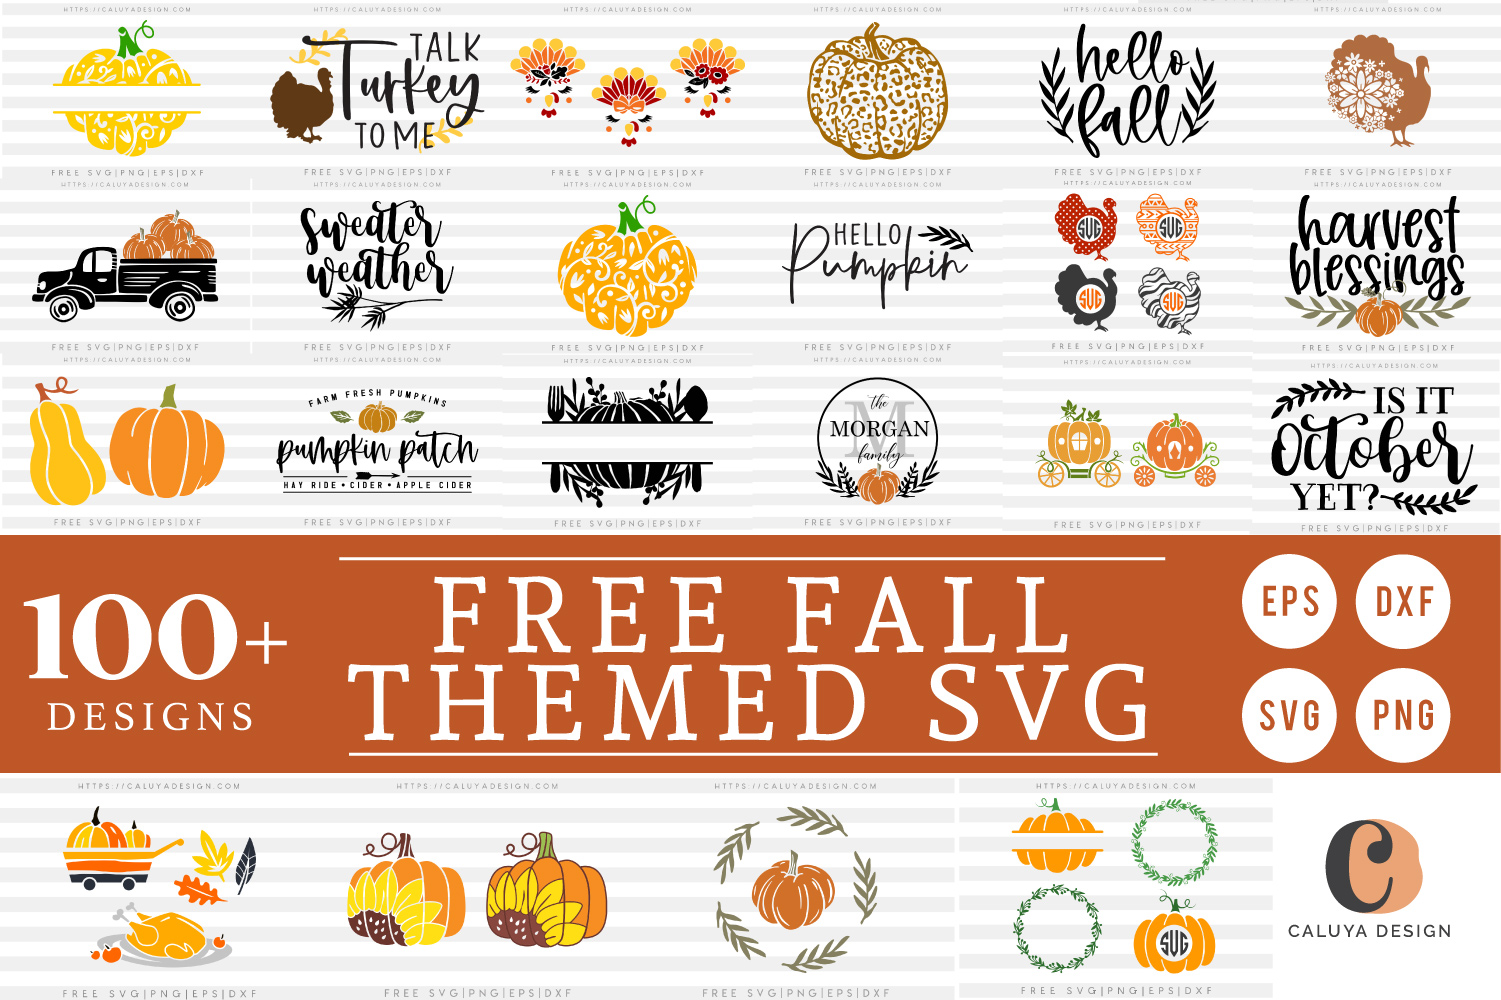 Download 100+ Free Fall Themed SVG by Caluya Design For Cricut